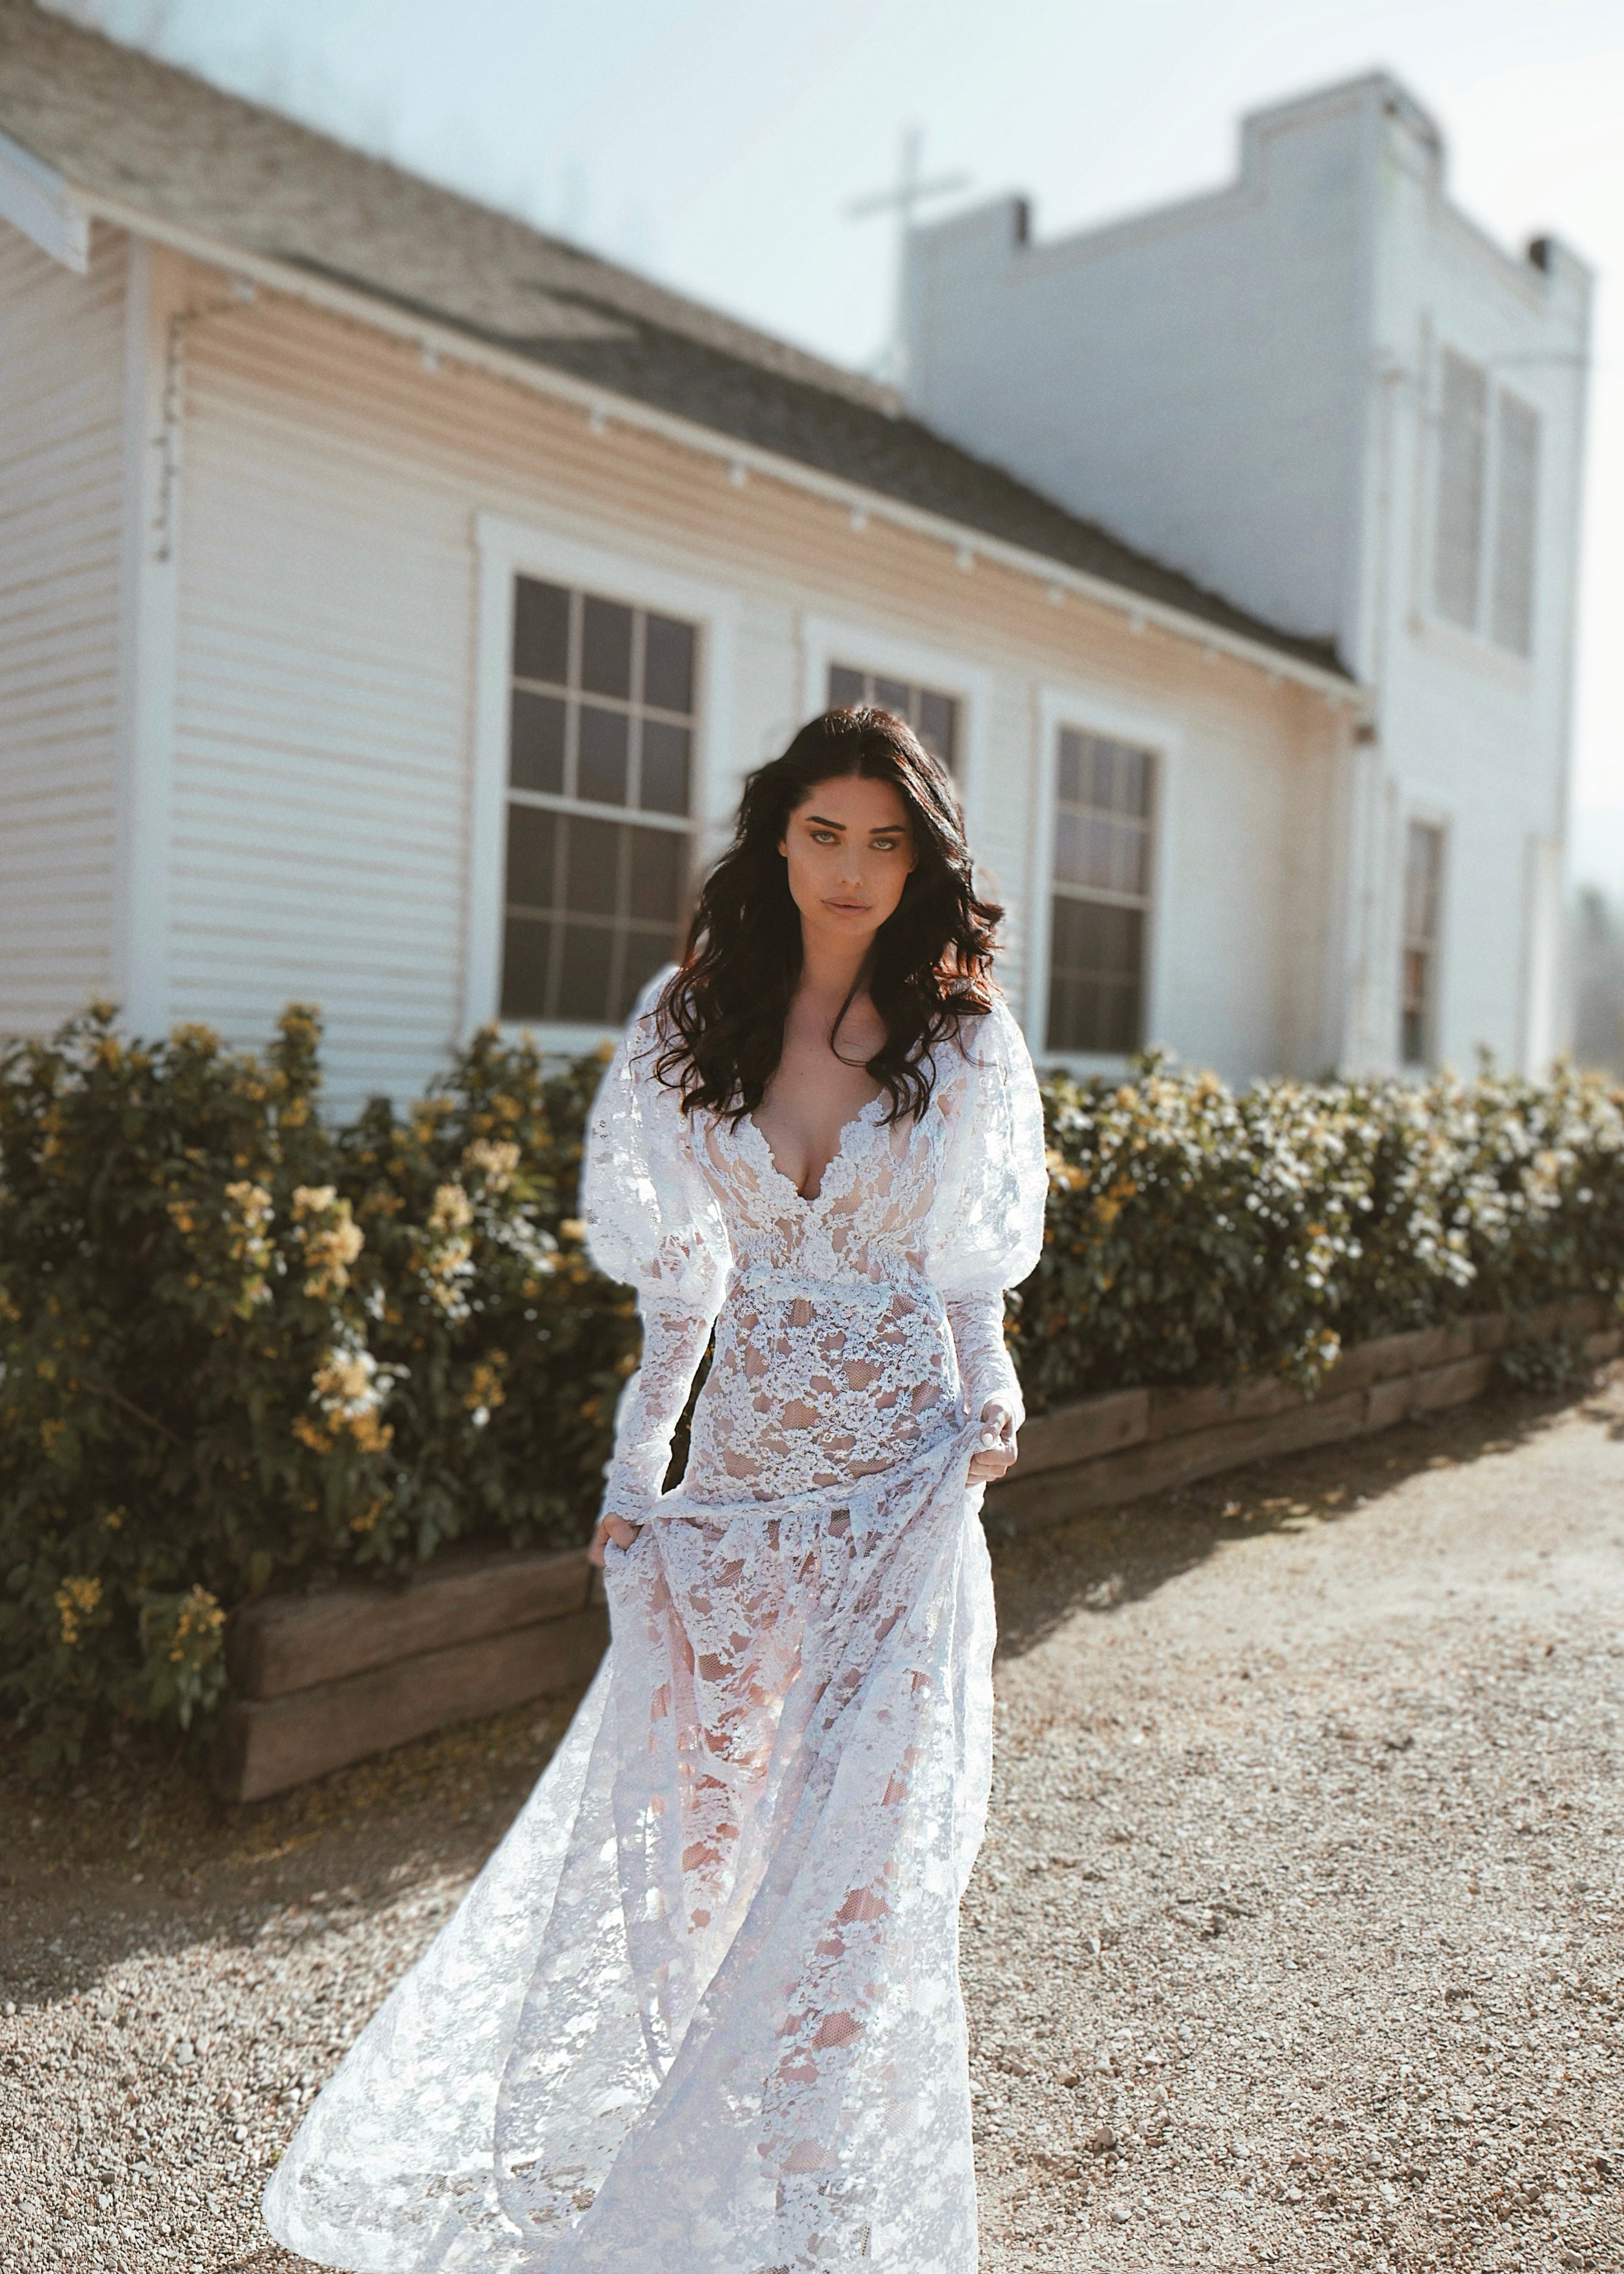 A model wears a vintage inspired long sleeve lace wedding gown.